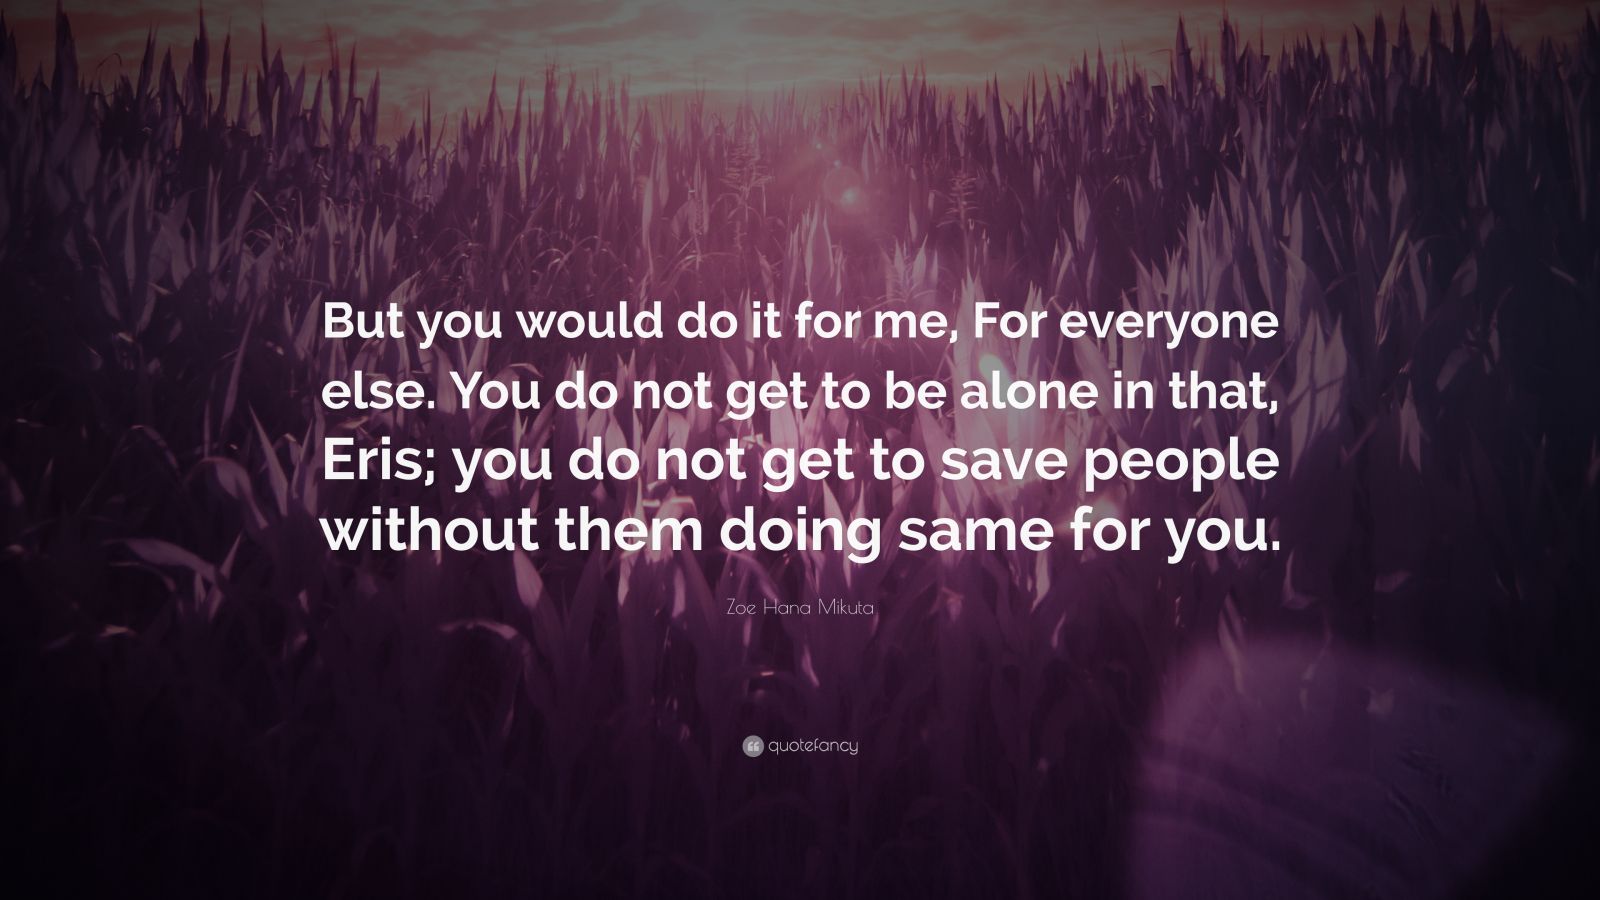 Zoe Hana Mikuta Quote: “But you would do it for me, For everyone else ...